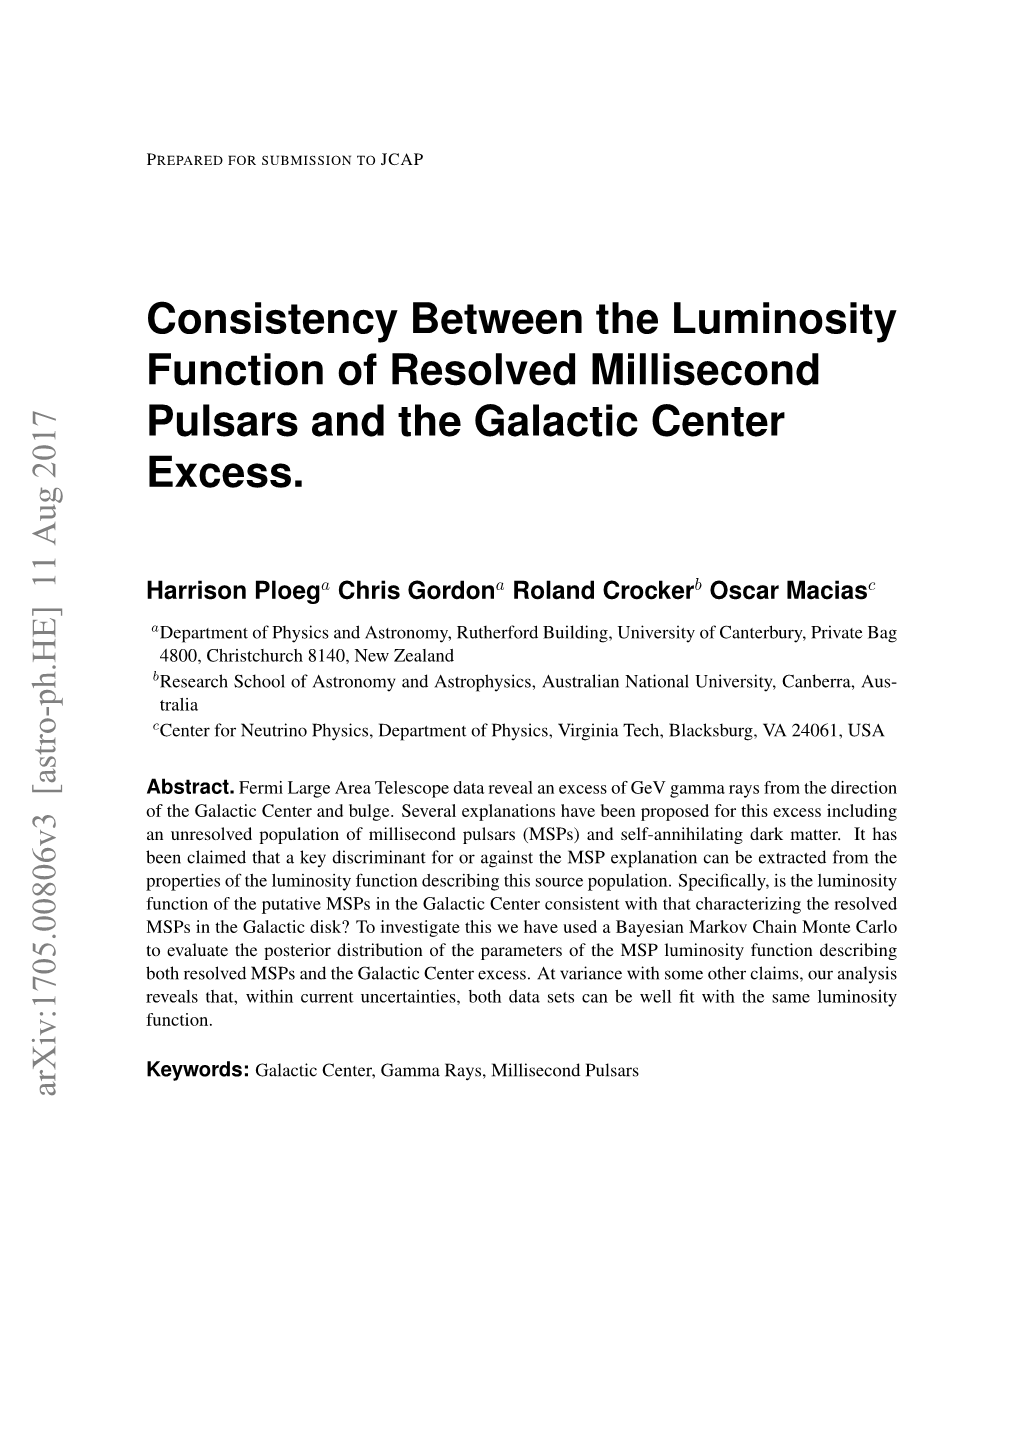 Consistency Between the Luminosity Function of Resolved Millisecond Pulsars and the Galactic Center Excess